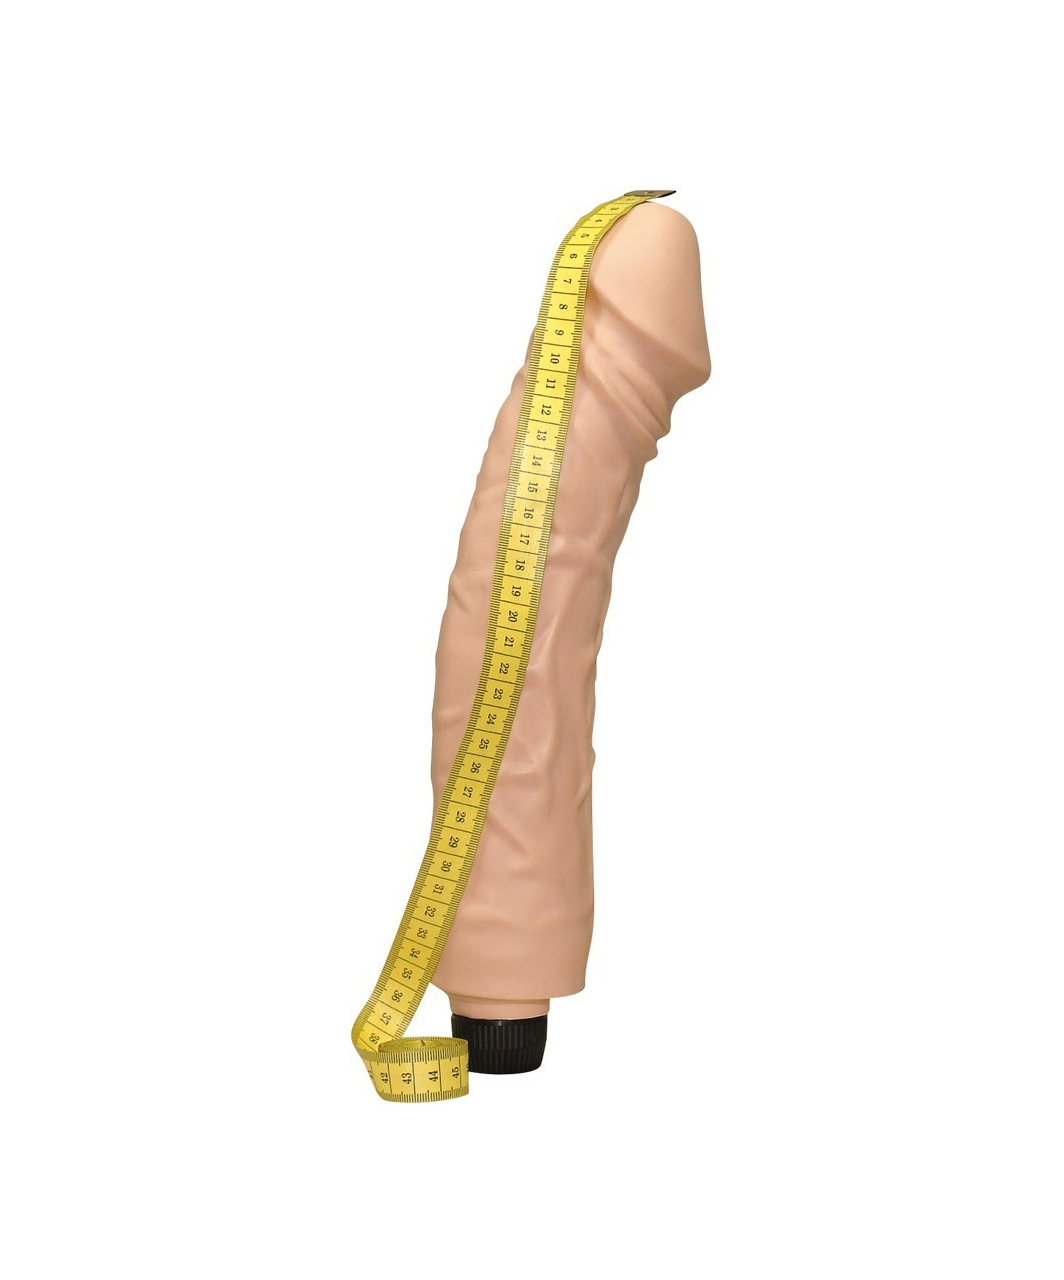 You2Toys Queeny Love Giant Lover vibrators